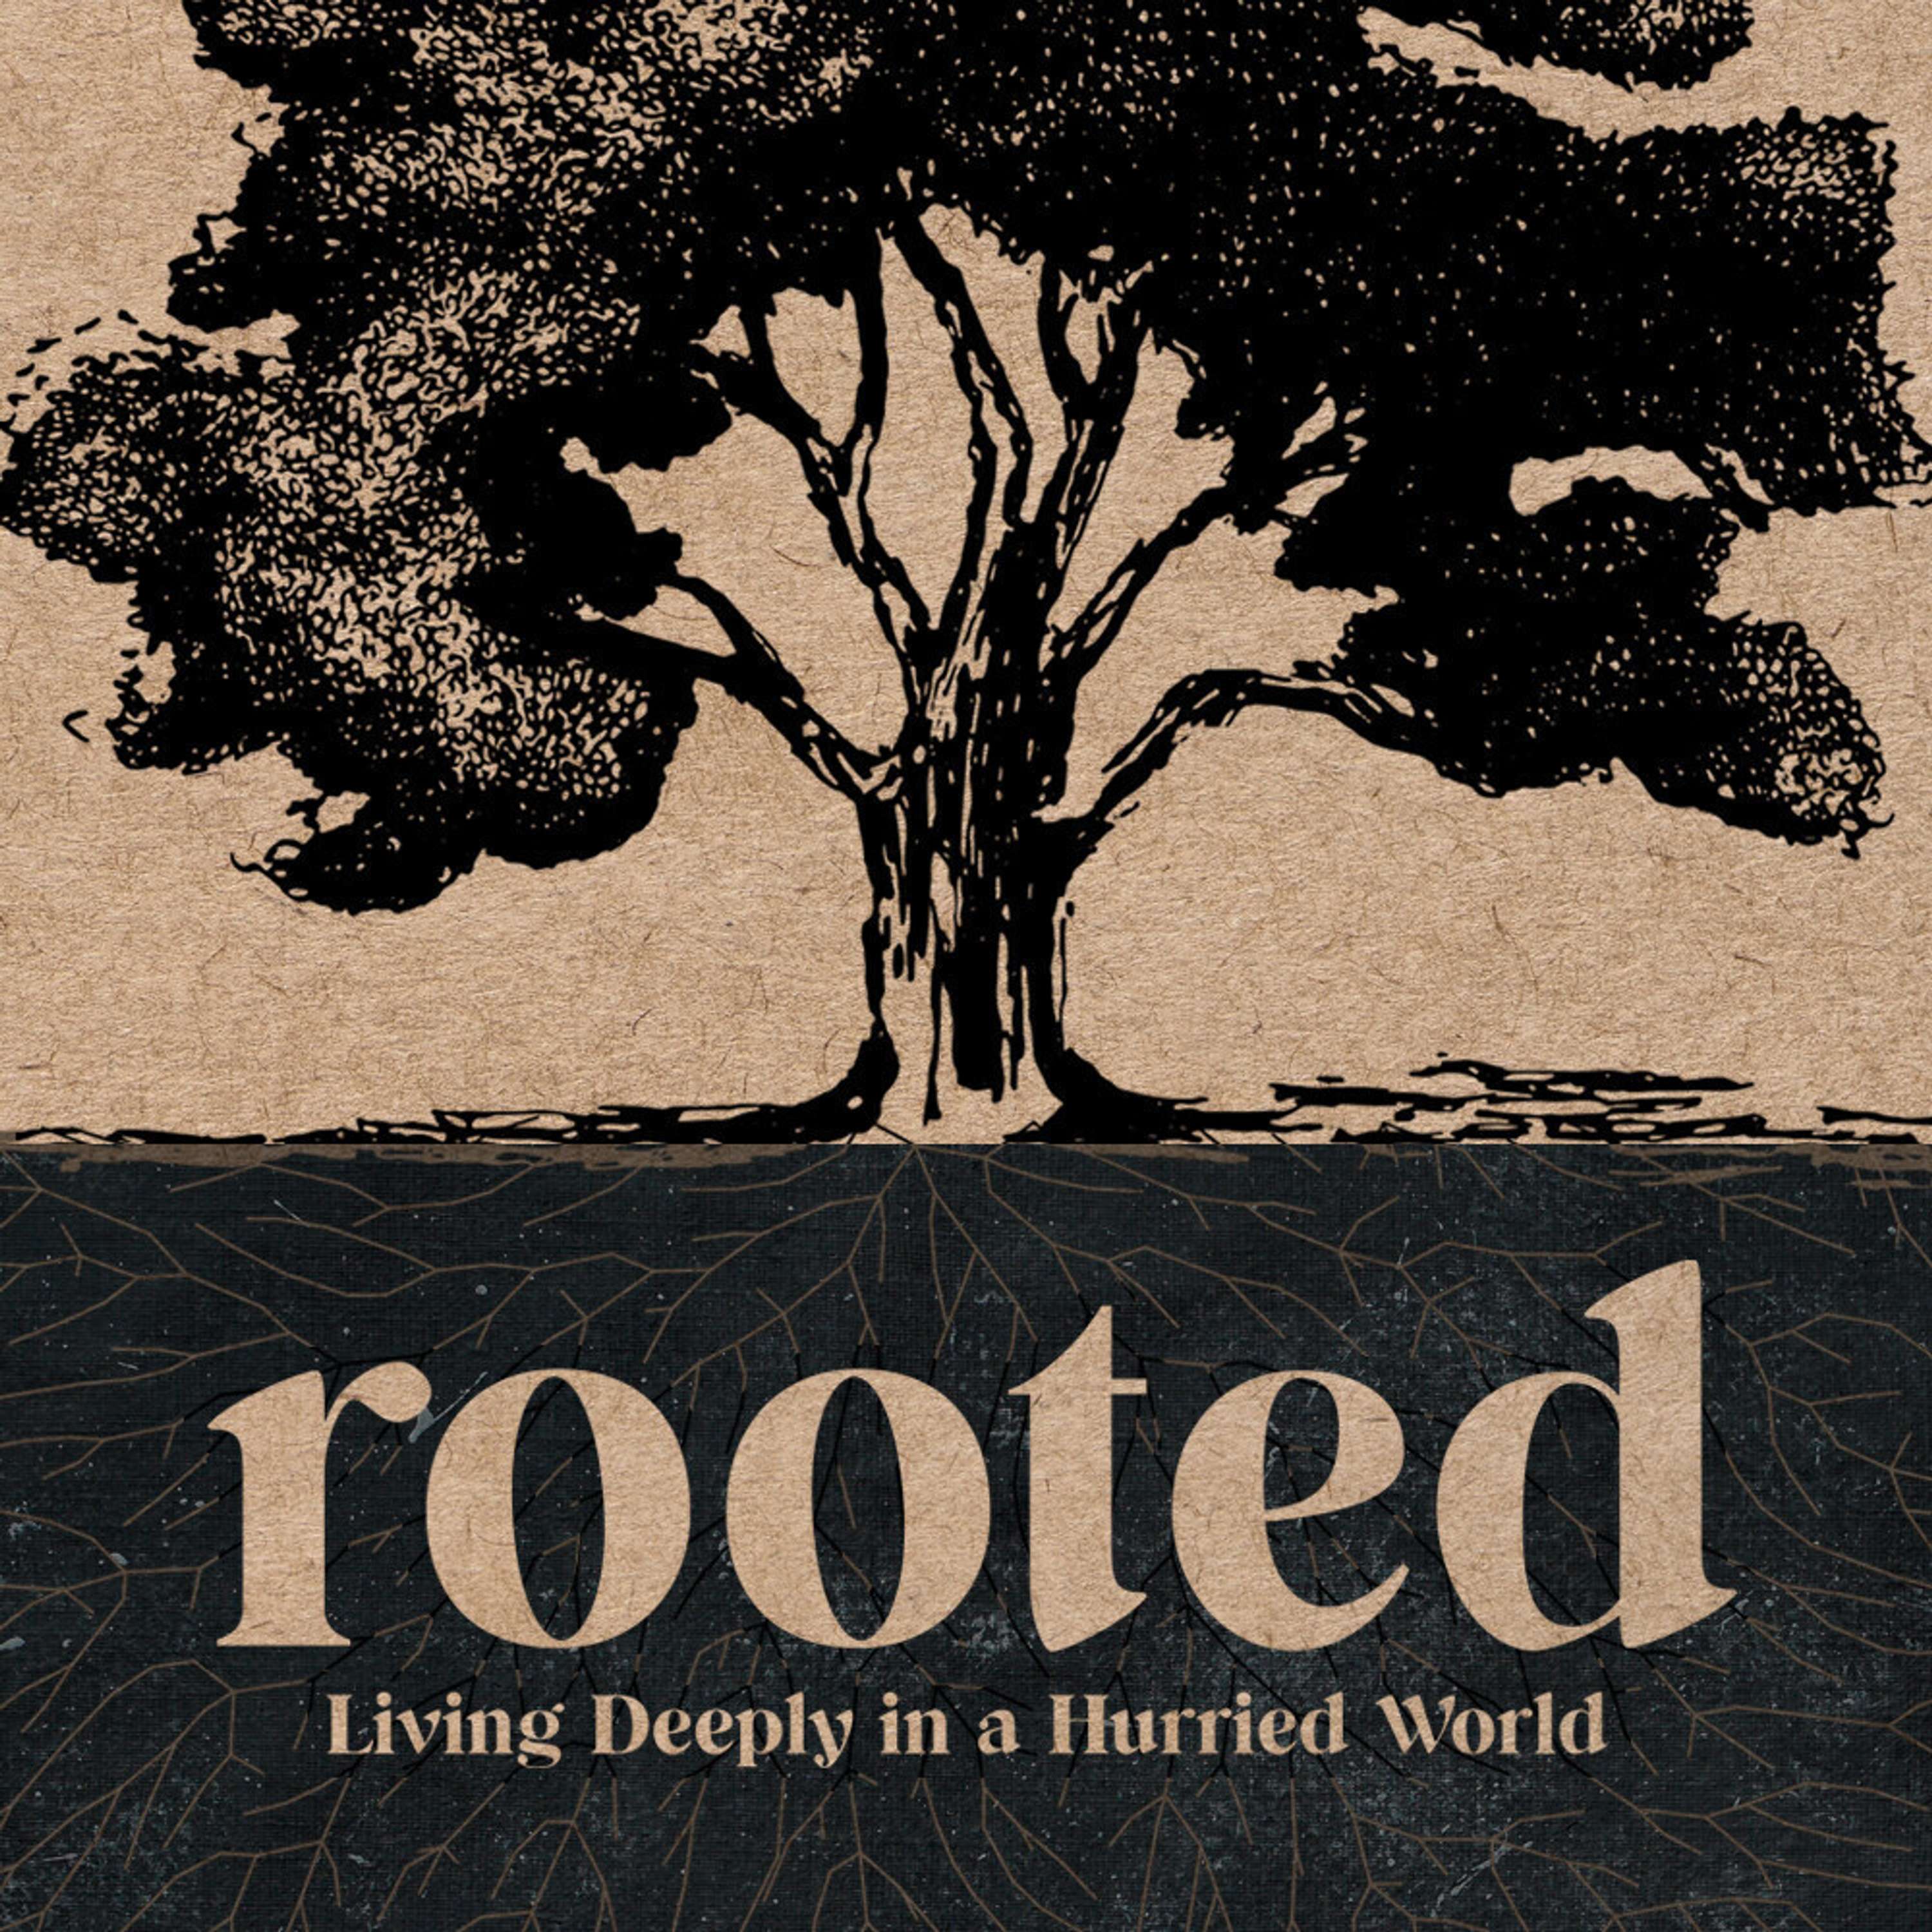 Where Are You Rooted? (Col. 2)